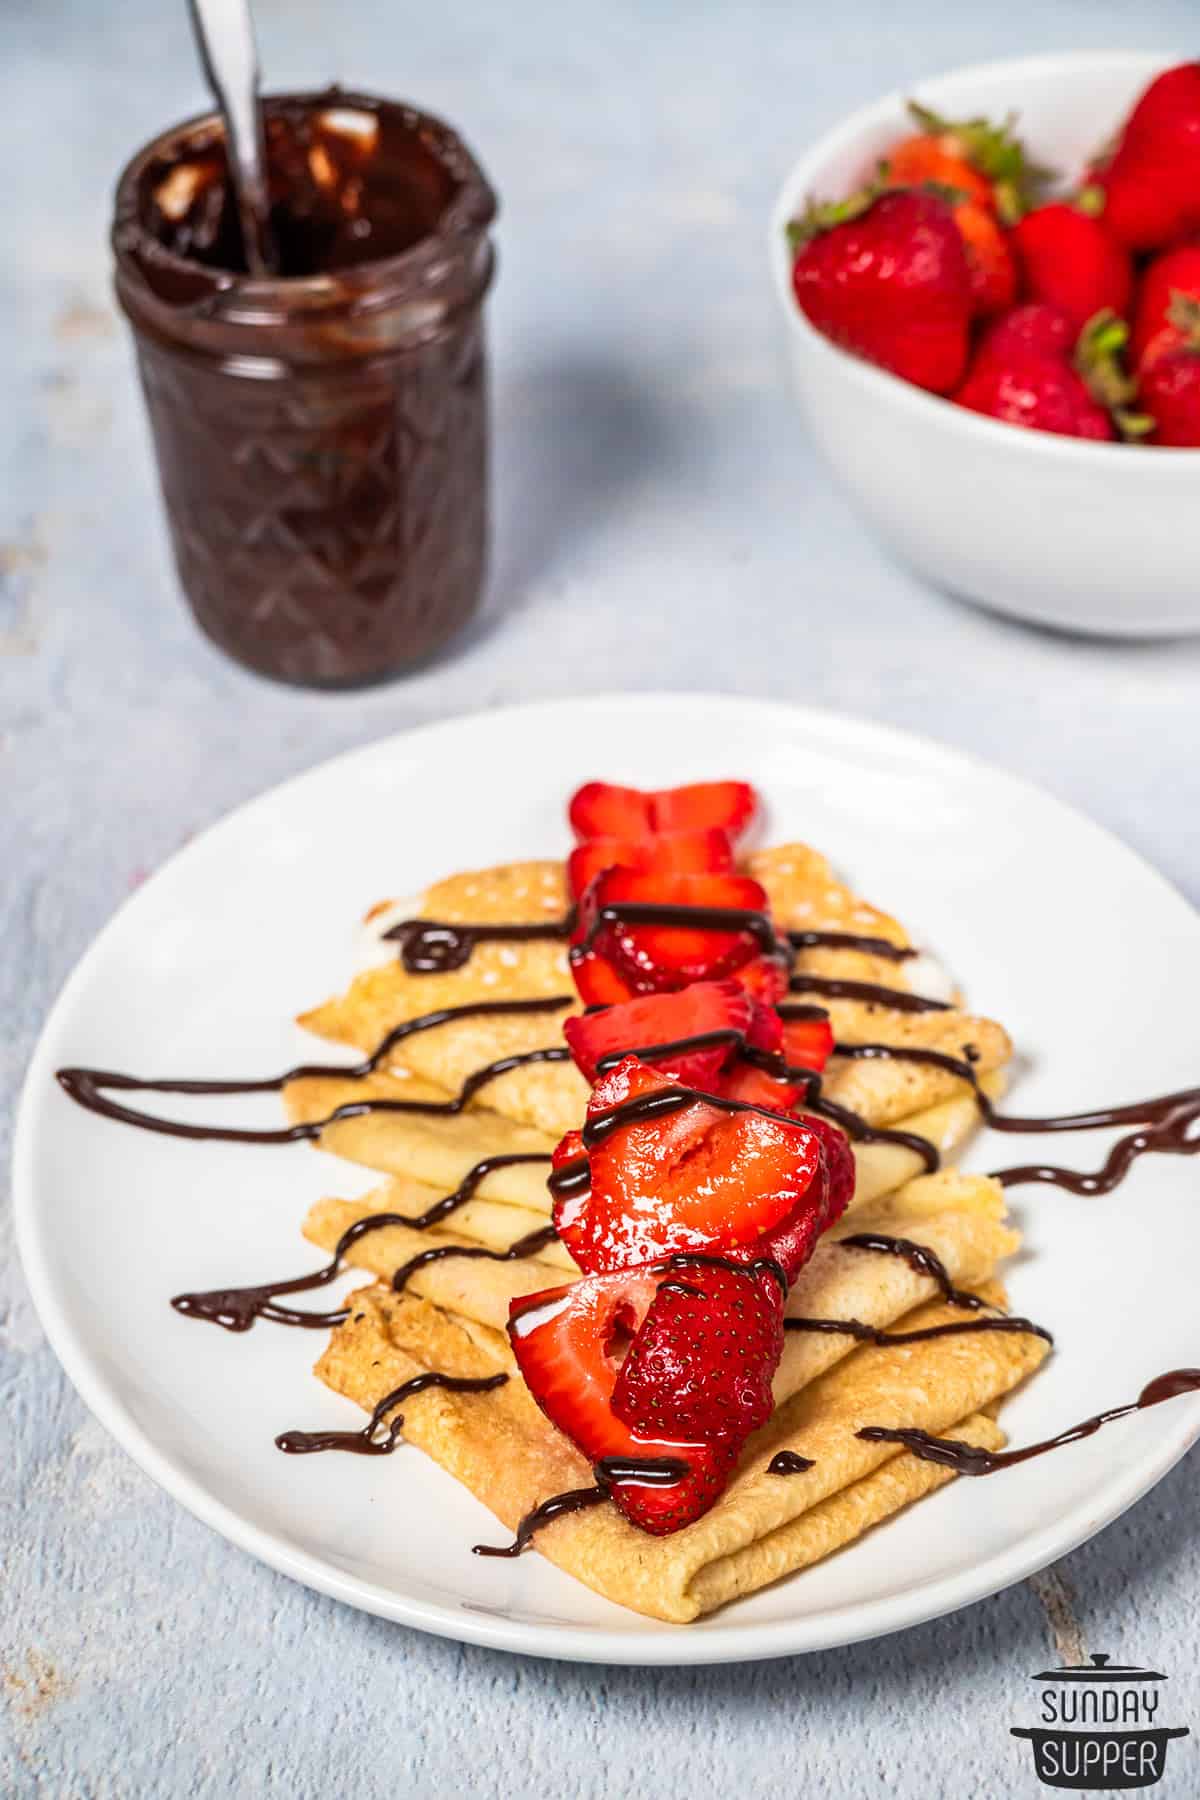 chocolate sauce drizzled over crepes with strawberries